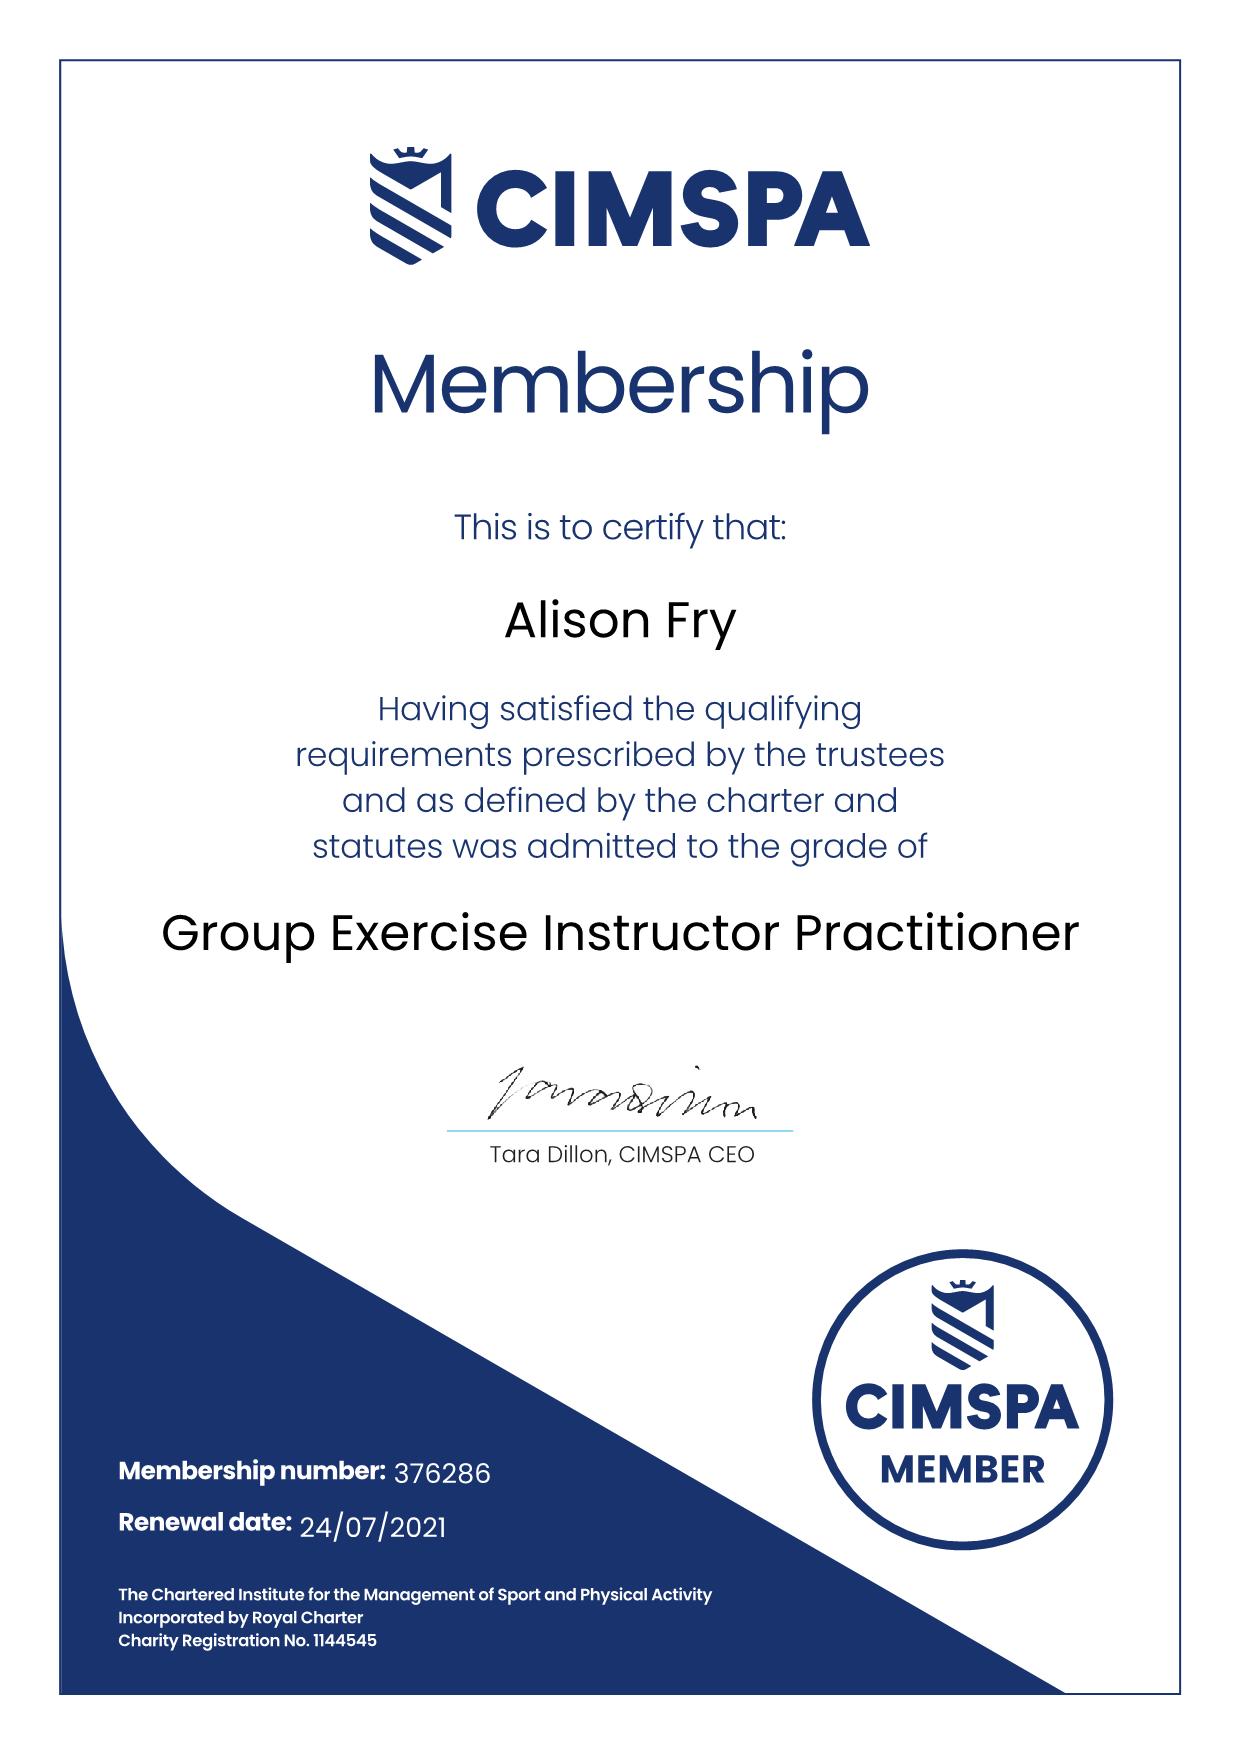 Group Exercise Instructor Practioner with the Chartered Institute for the Management of Sport and Physical Activity - 24th July 2020